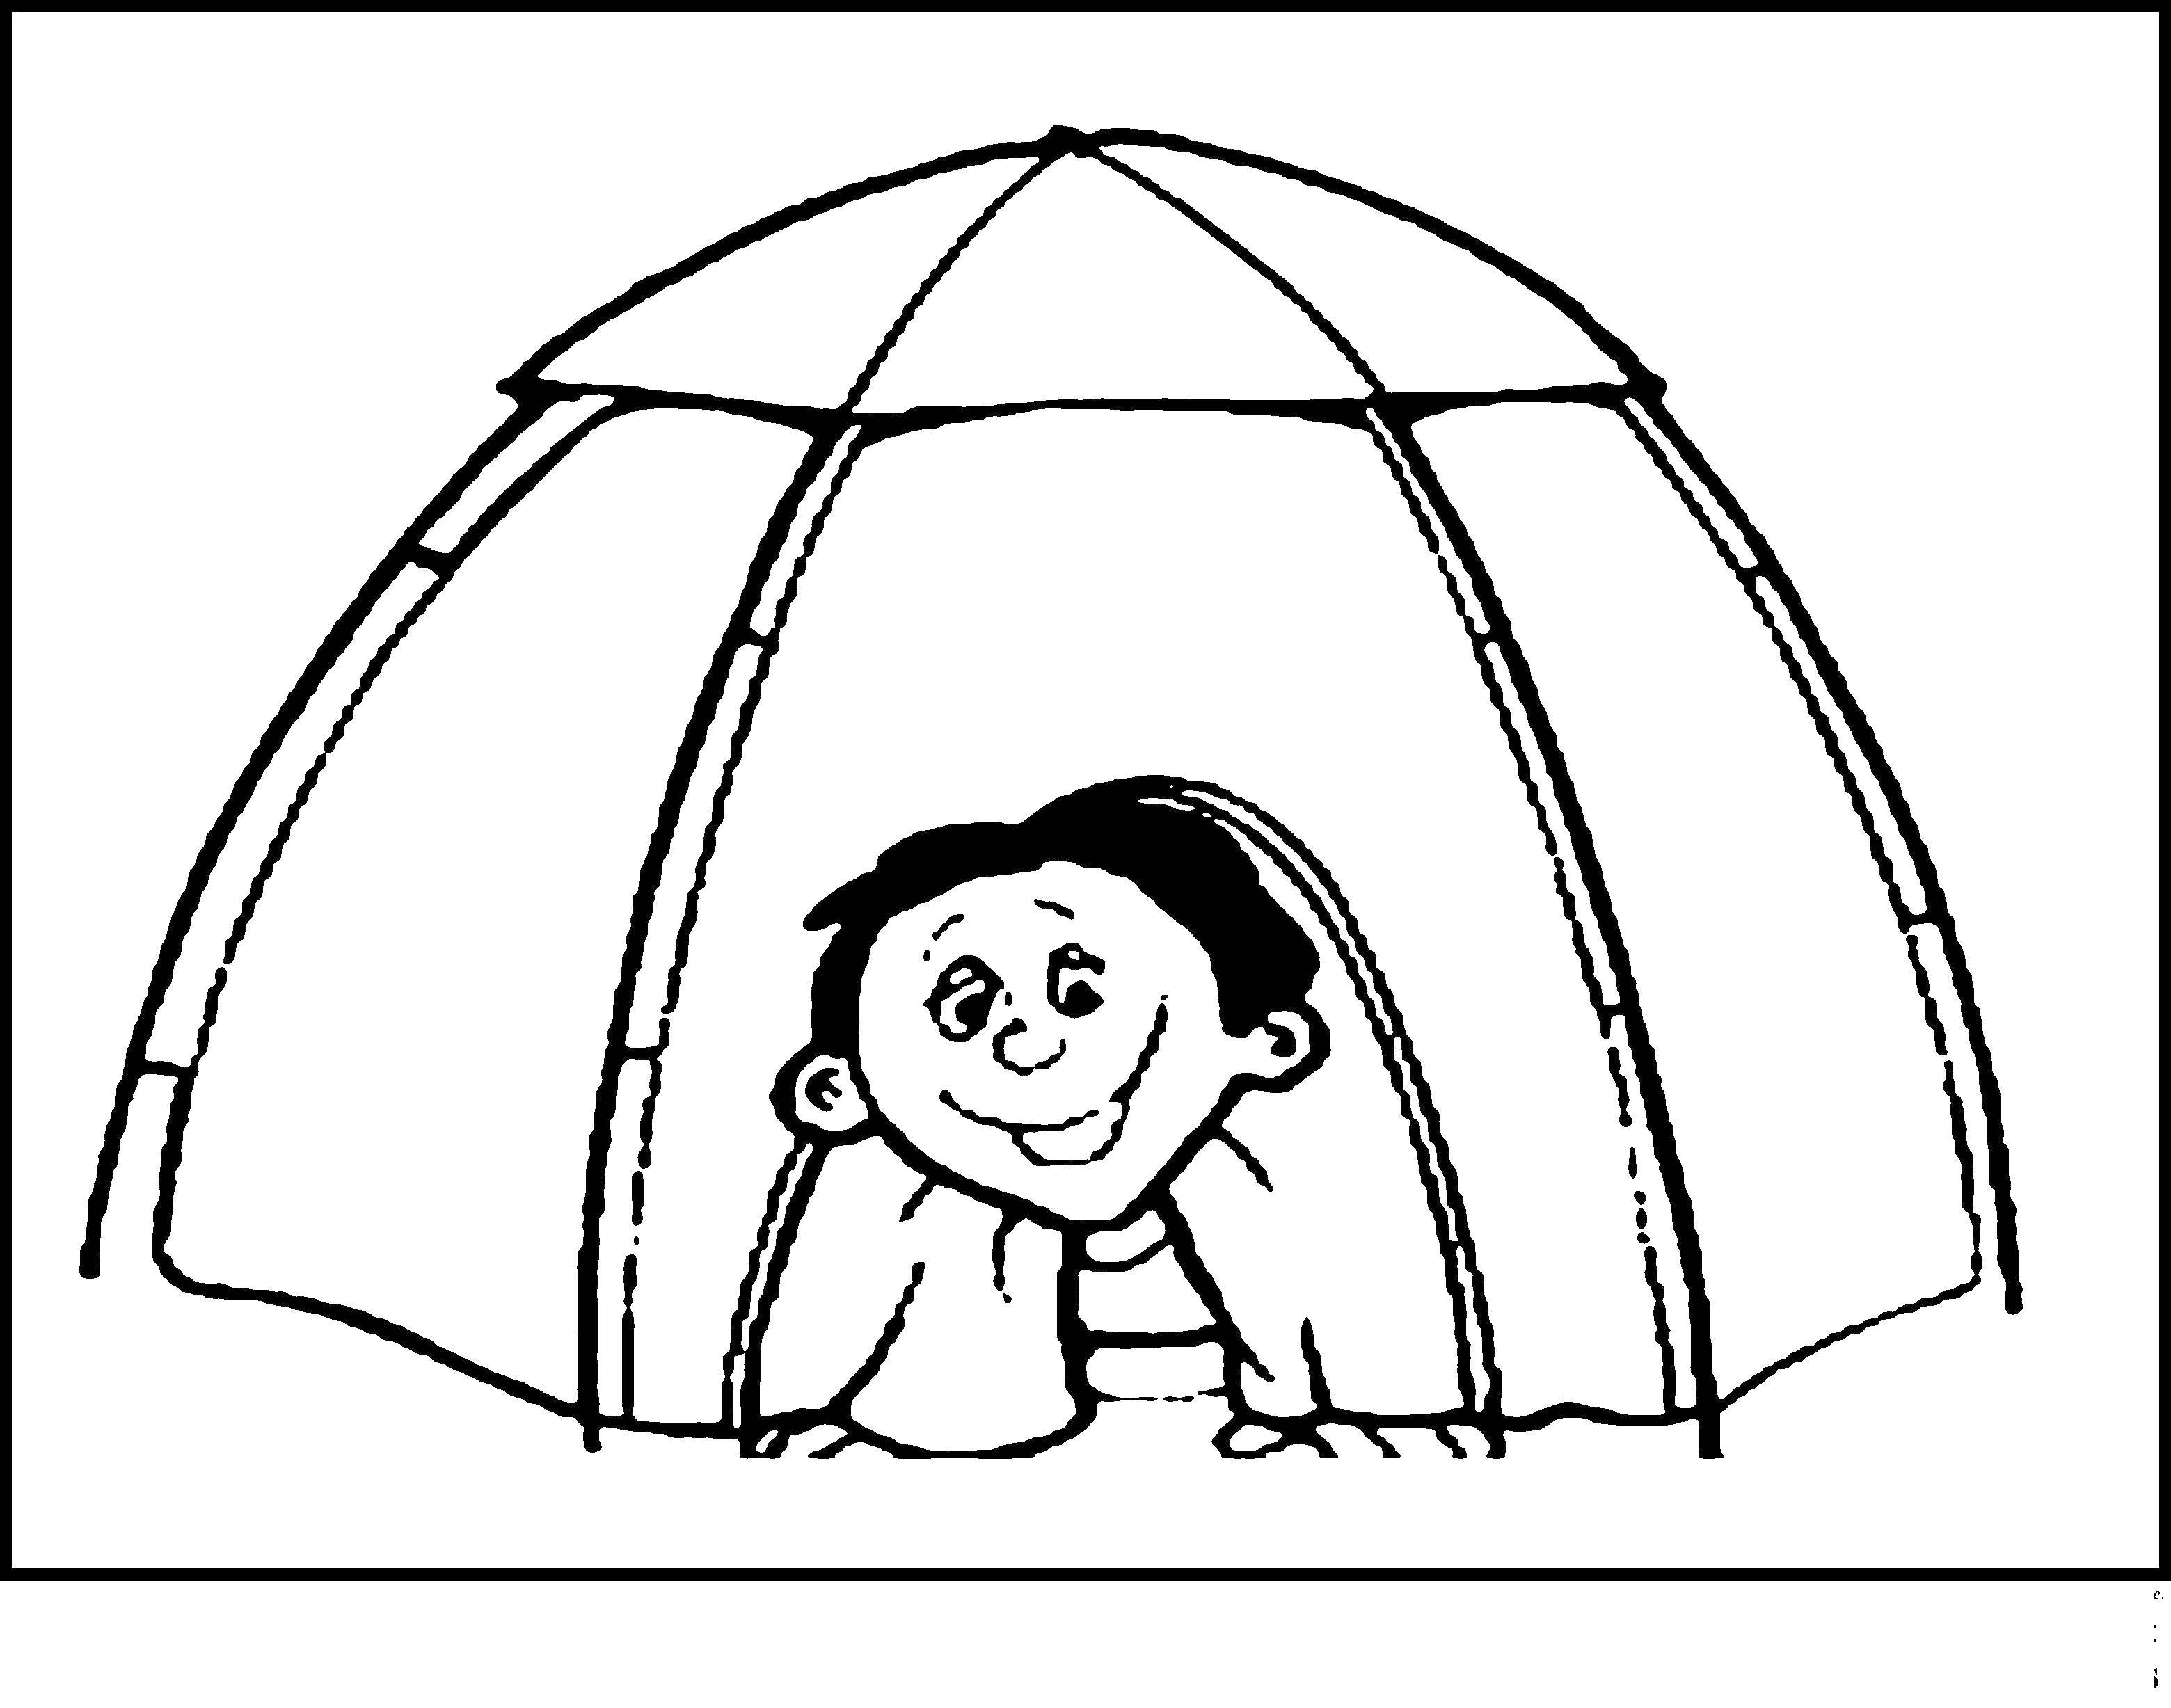 Coloring Tent. Category Camping. Tags:  Leisure, children, tent.